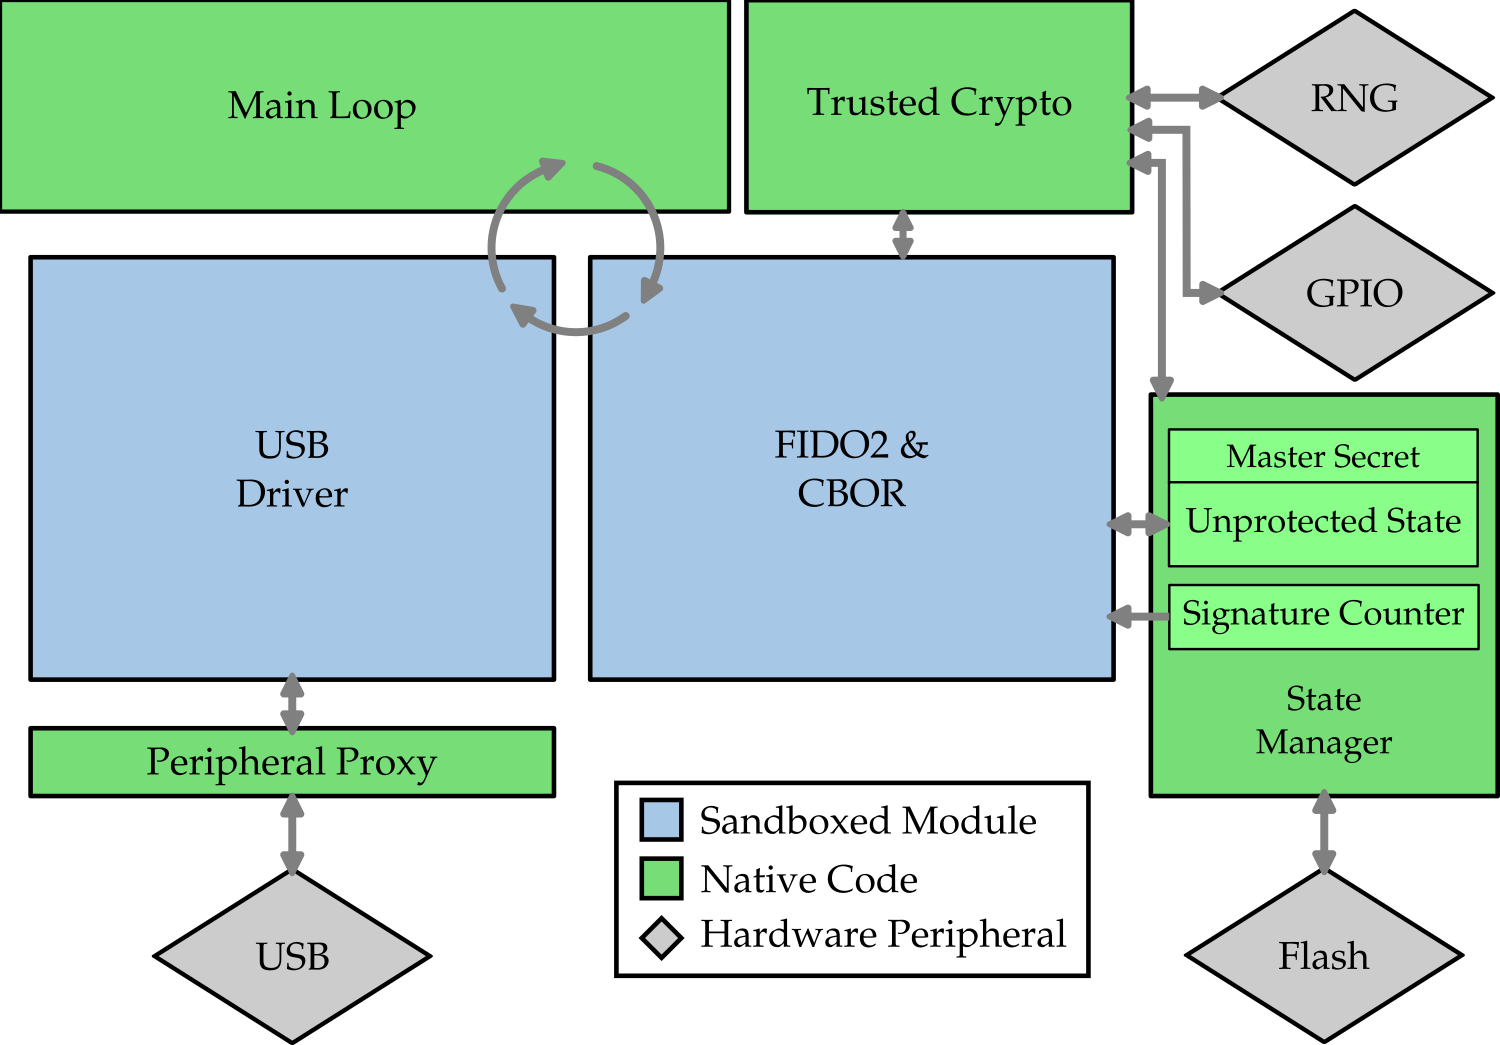 Plat places the USB Driver code and the FIDO2 logic/parsing code in their own modules and keeps the master secret, and cryptography functions that require access to it, in the trusted host.